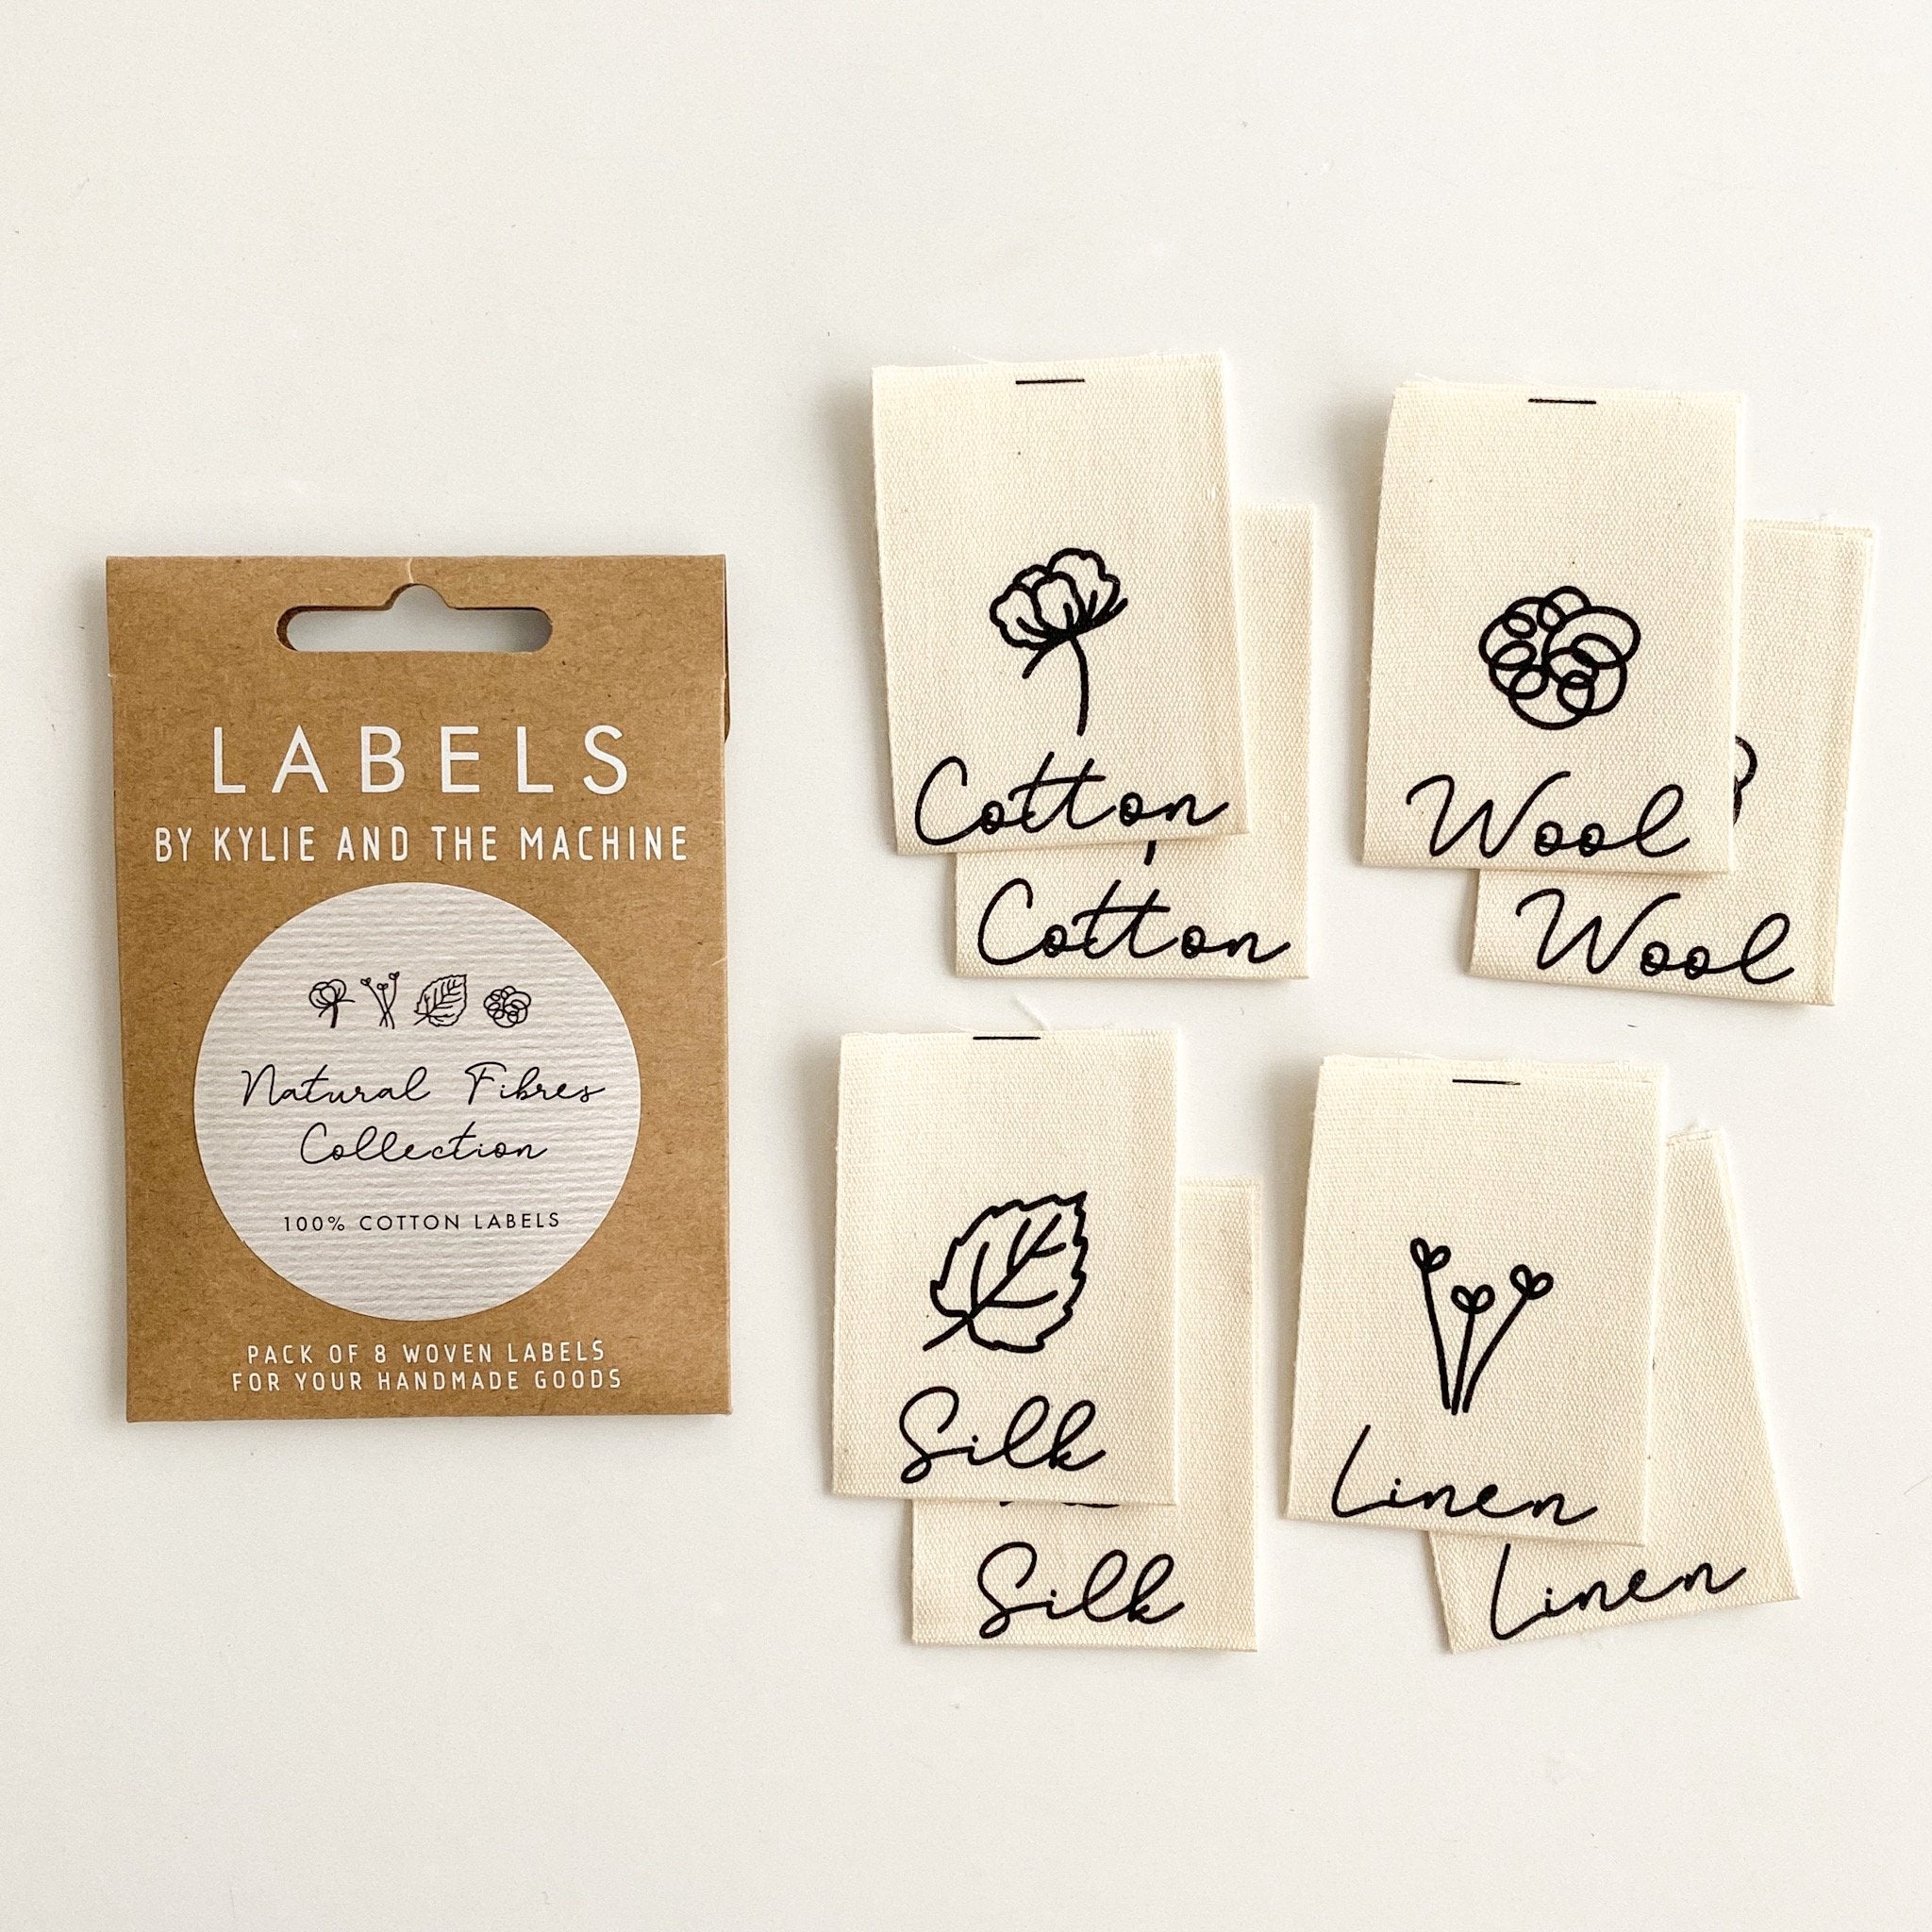 Kylie and the Machine - "NATURAL FIBRES COLLECTION " Pack of 8 Woven Labels